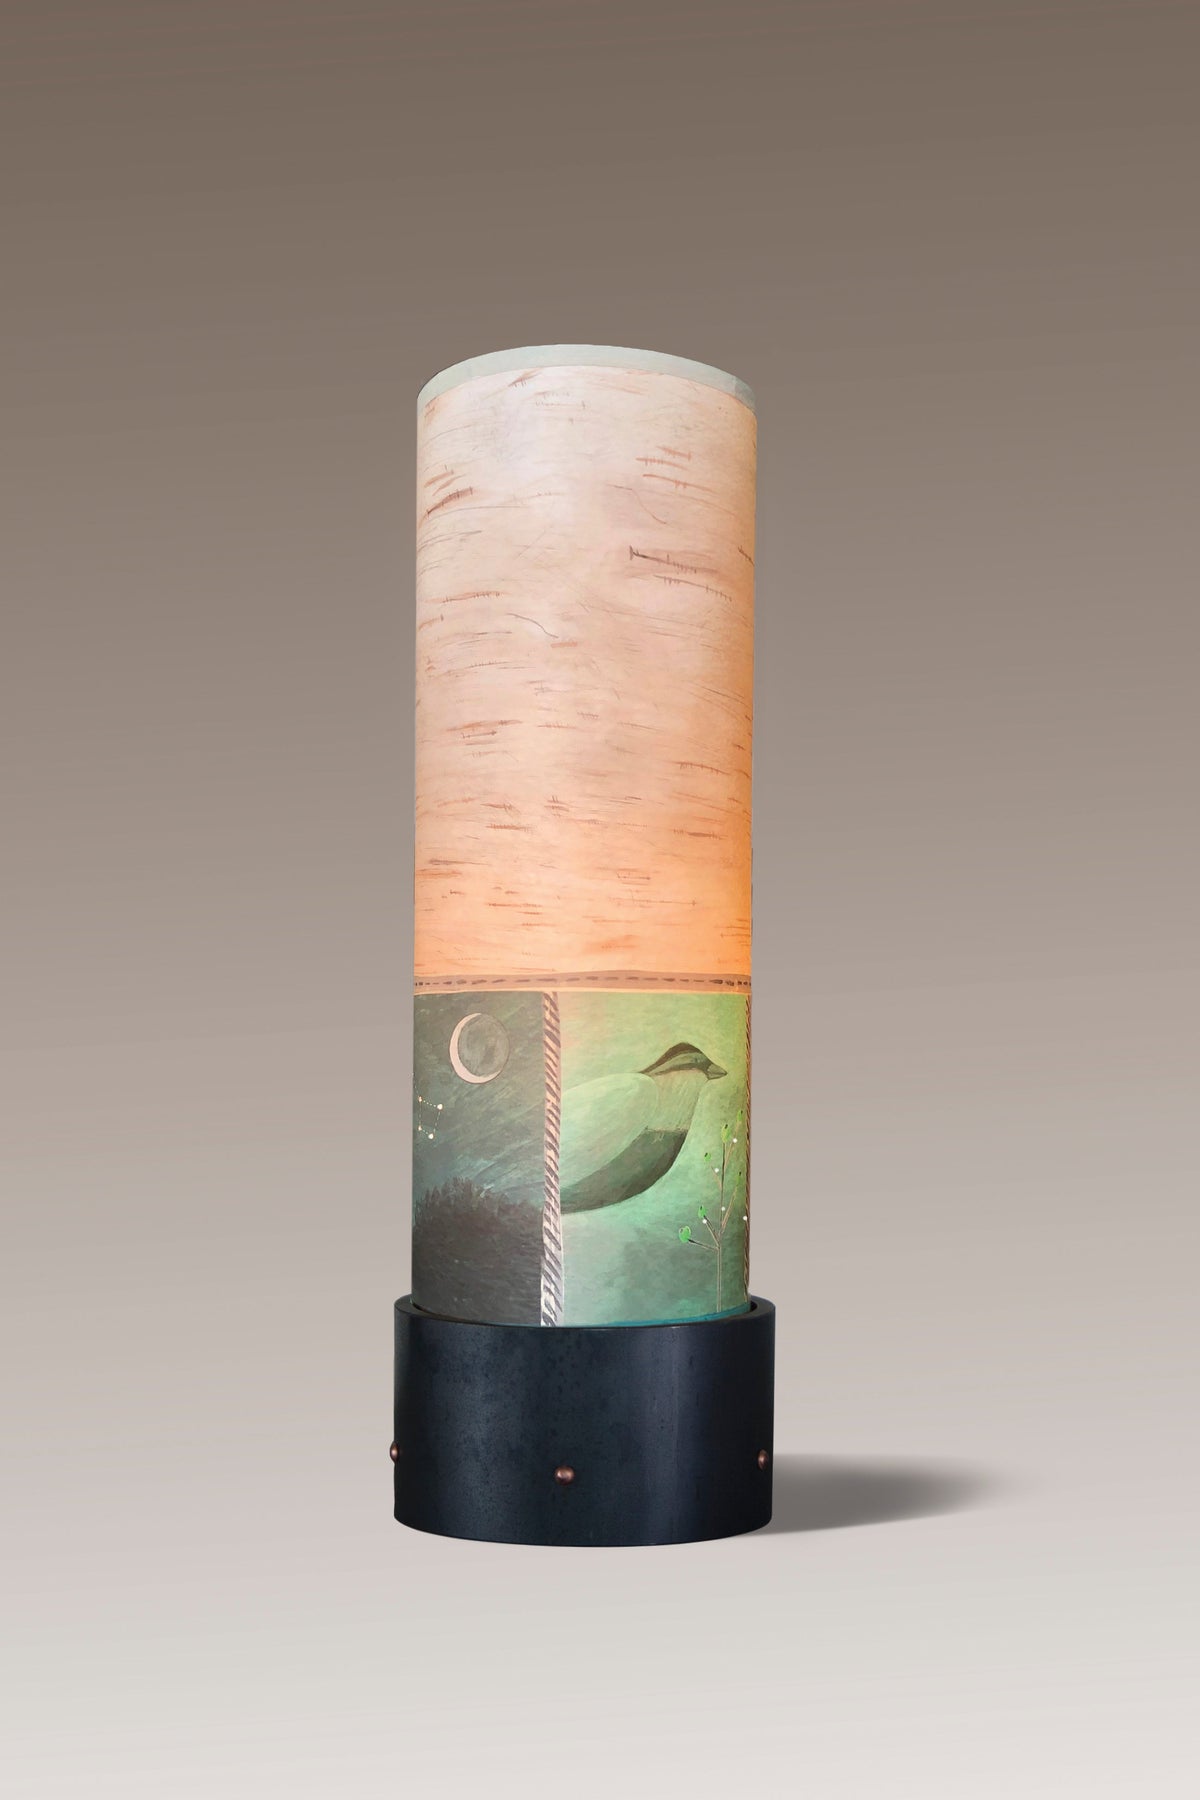 Janna Ugone &amp; Co Luminaires Steel Luminaire Accent Lamp with Woodland Trails in Birch Shade